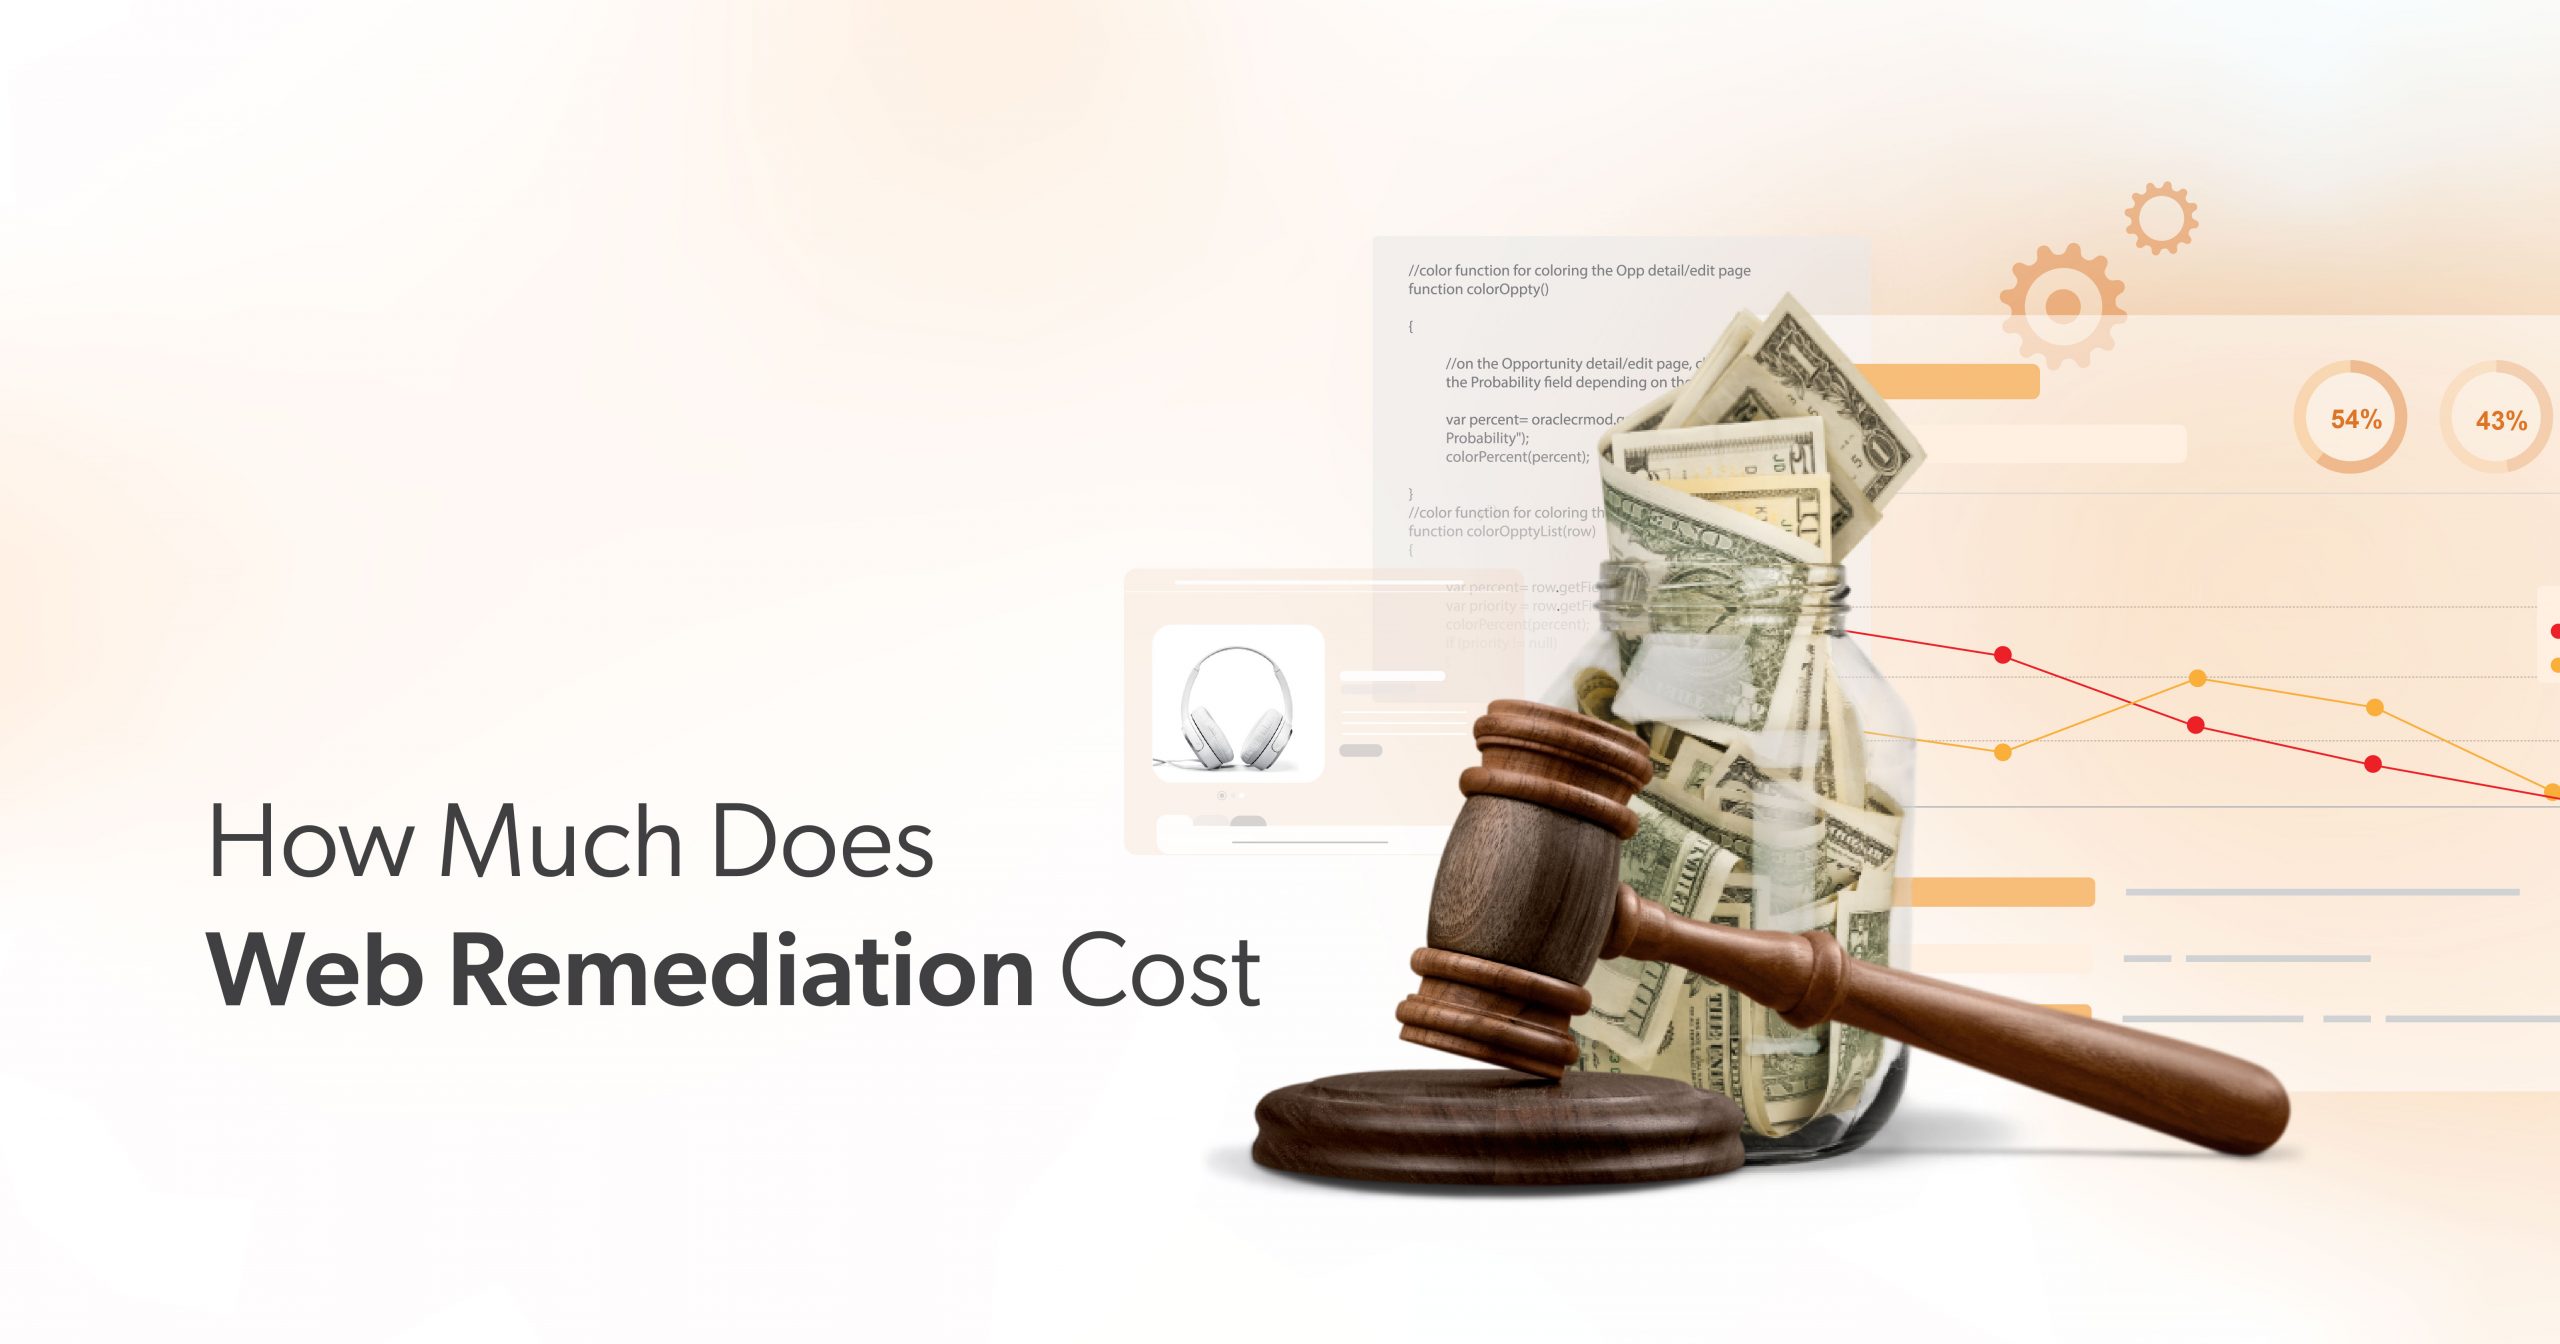 How Much Does Web Remediation Cost